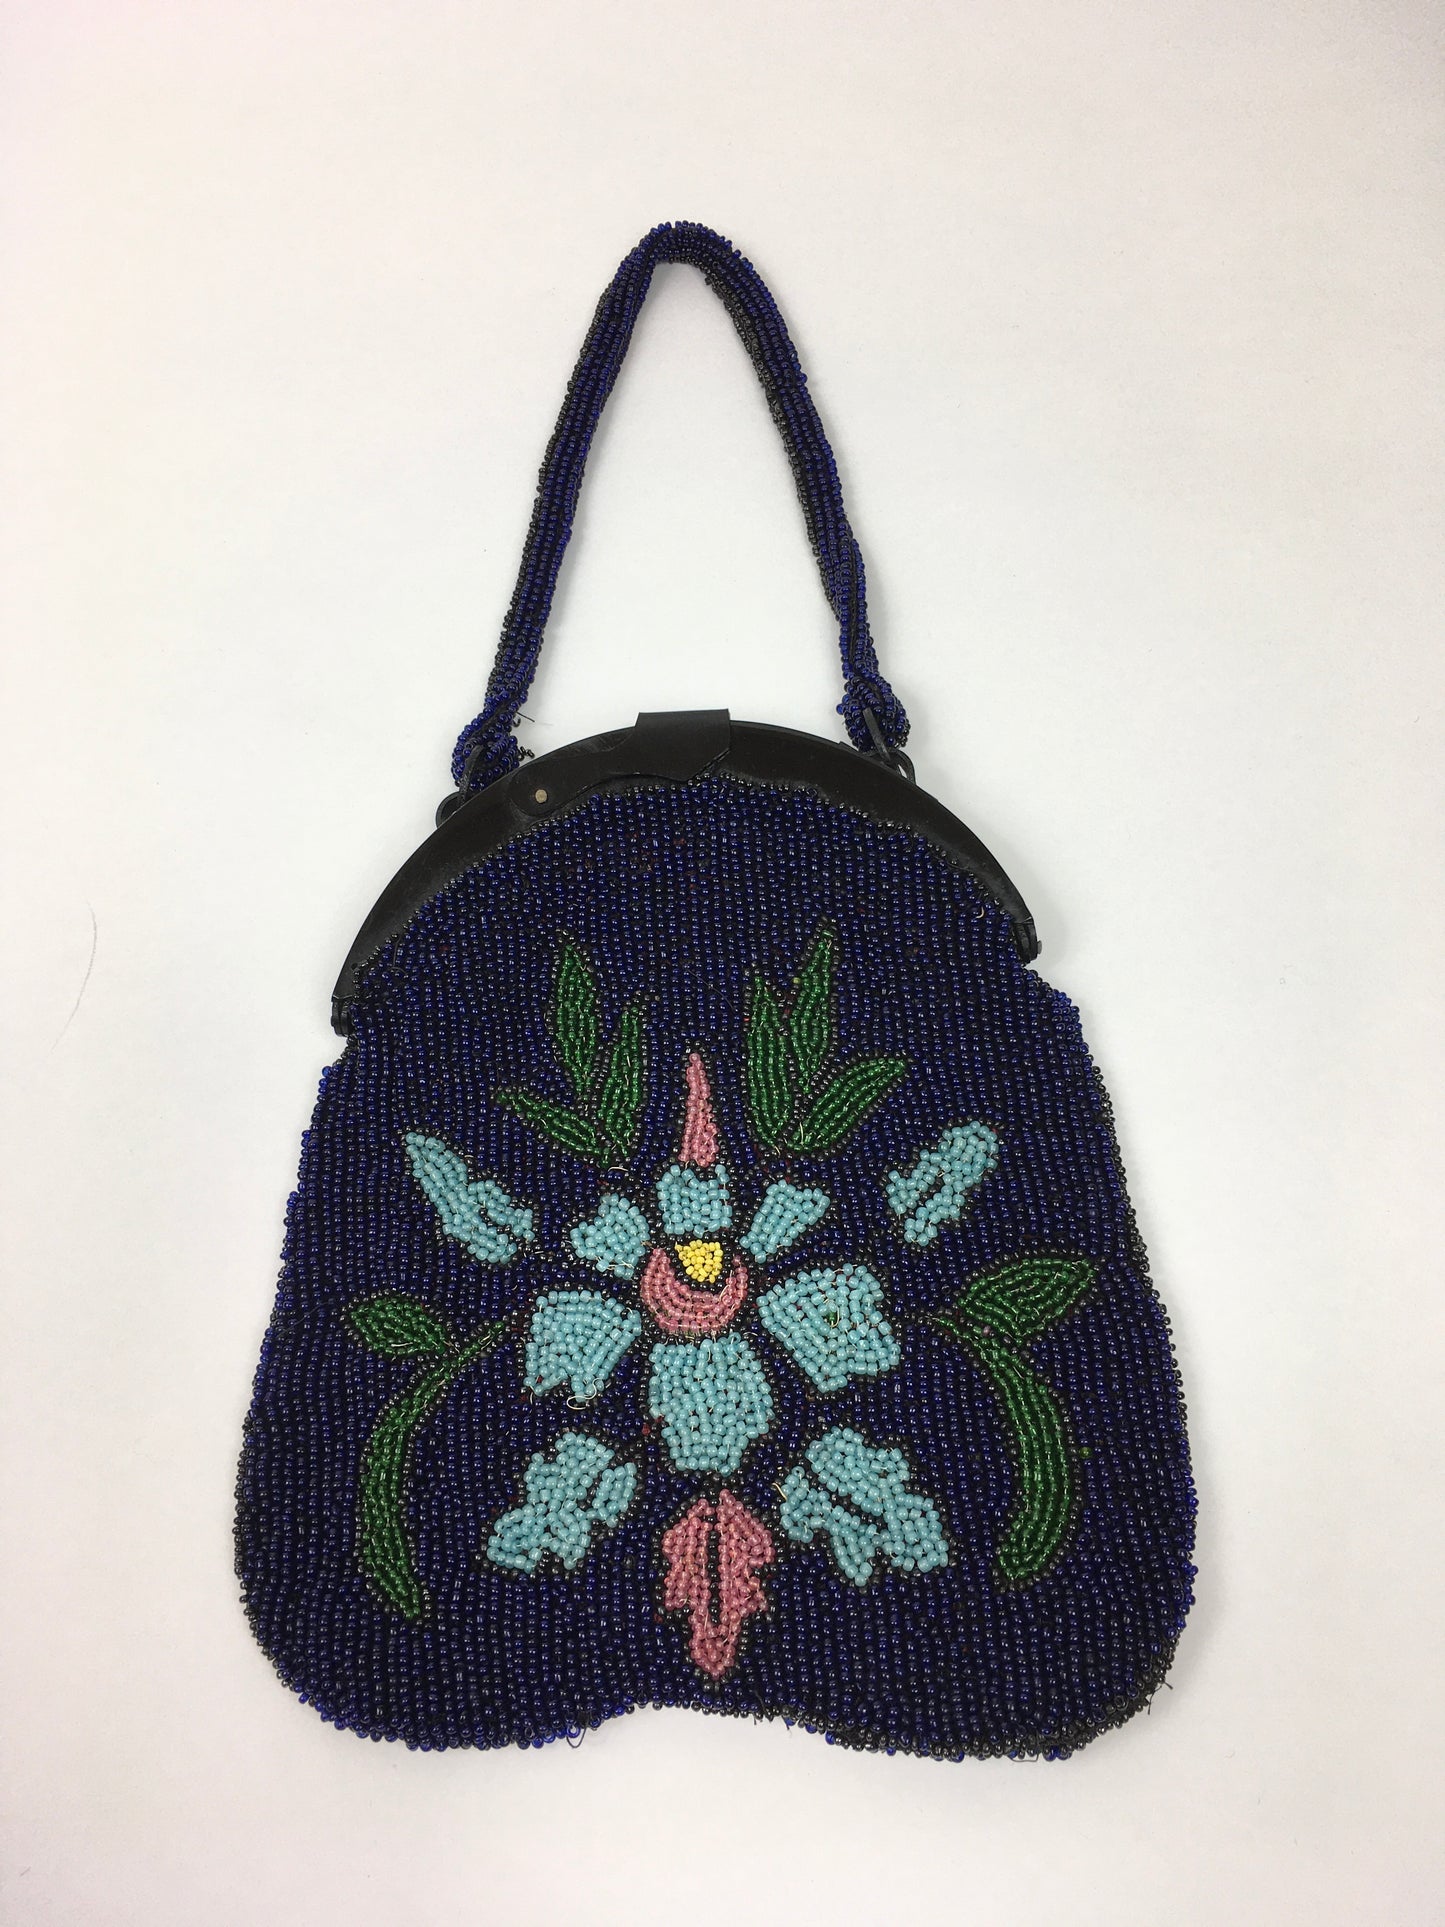 Original Early 1920’s Beaded Handbag - In an Exquisite Colour Palette of Rich Blues, Greens, Turquoise, Powdered Blush and Yellow